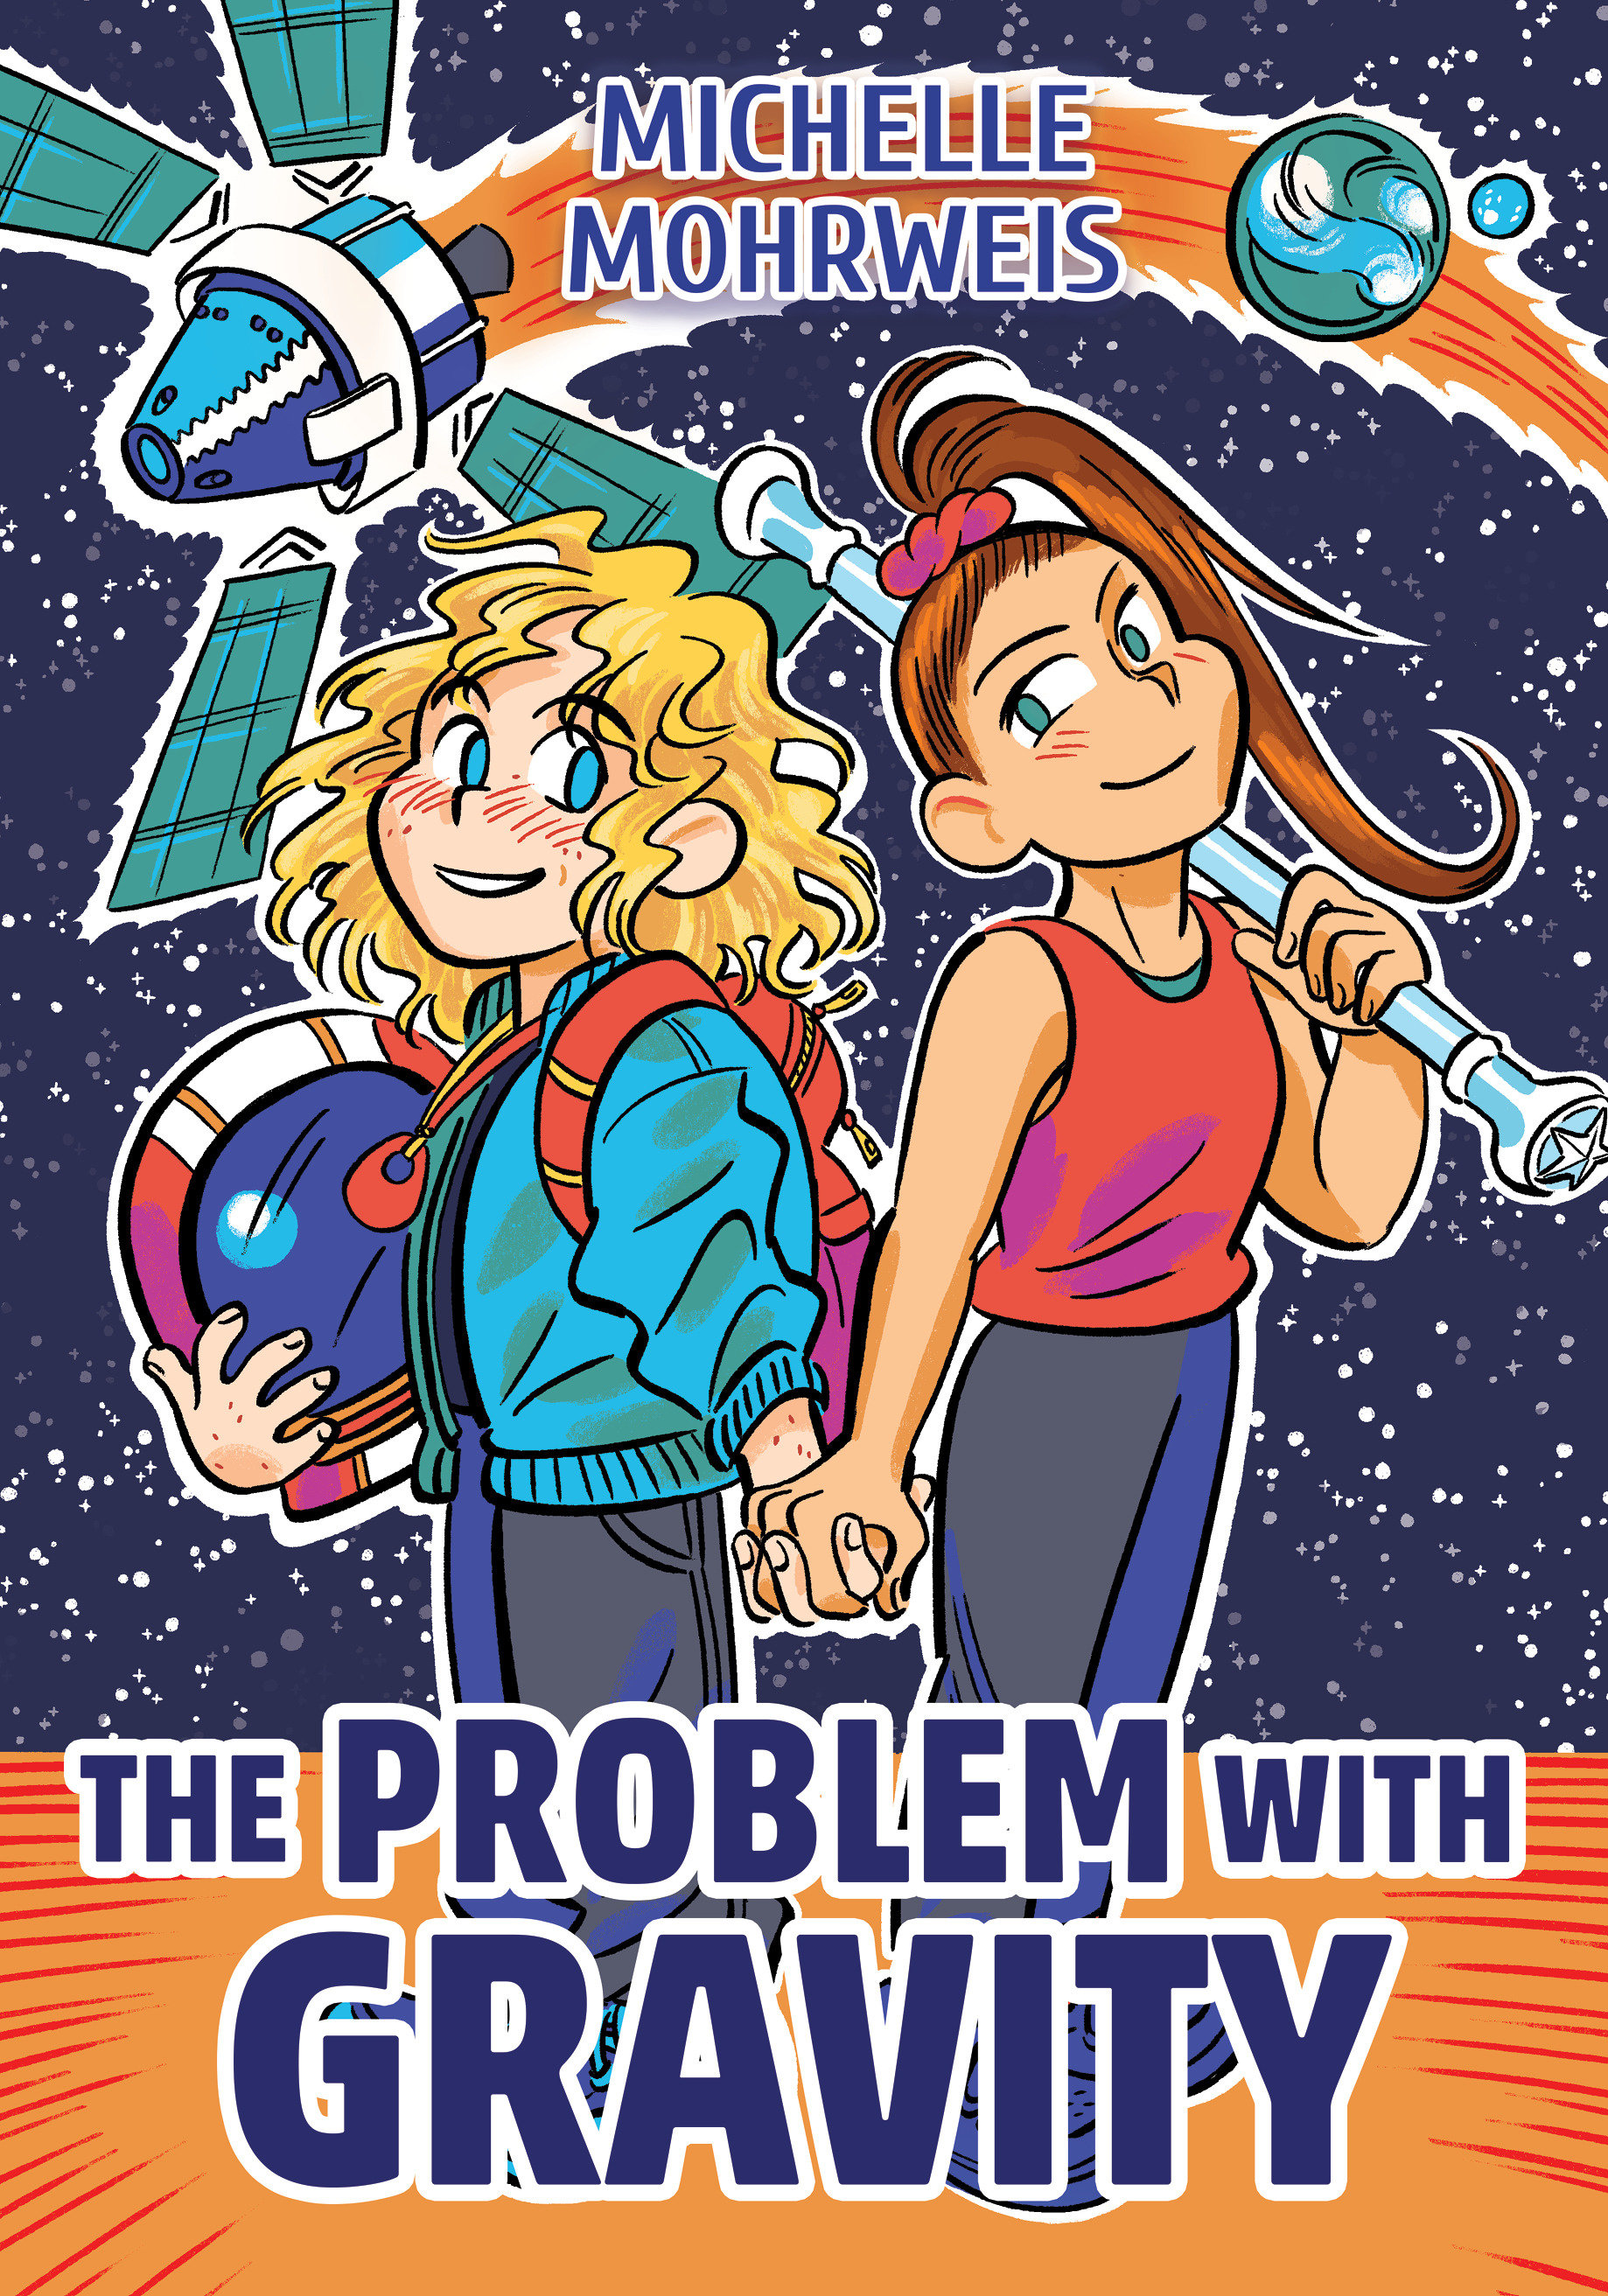 The Problem With Gravity (Hardcover Book)